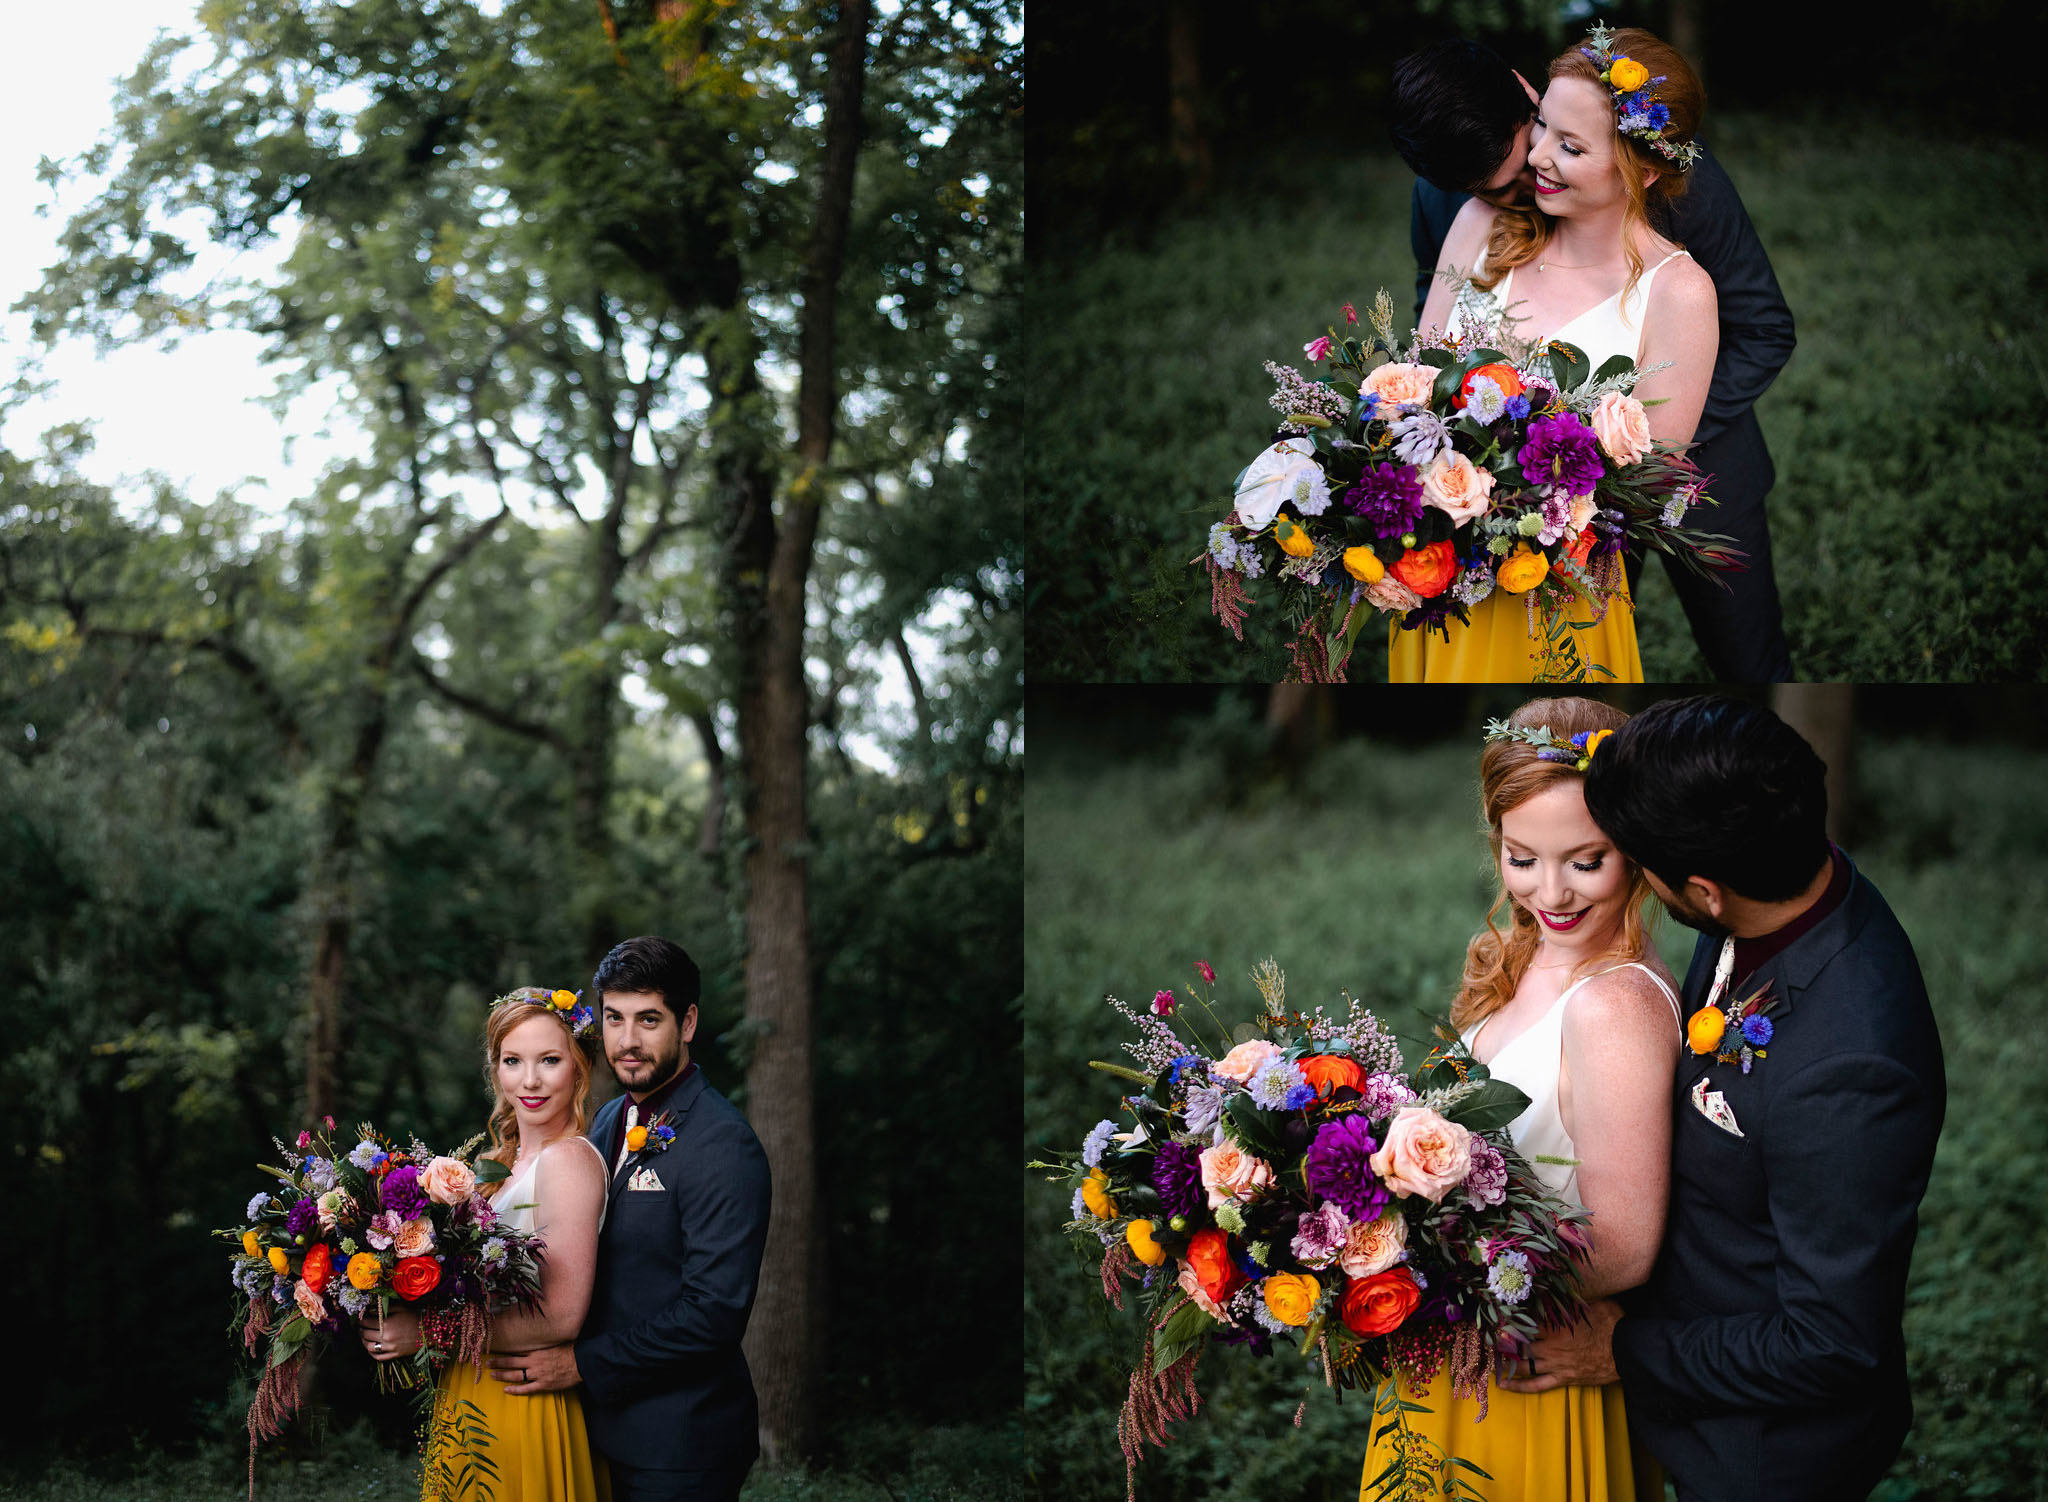 Midwest Wedding Photographer EffJay Photography Jewel Tone Wedding Colors with Big Bold Bouquet005.jpg